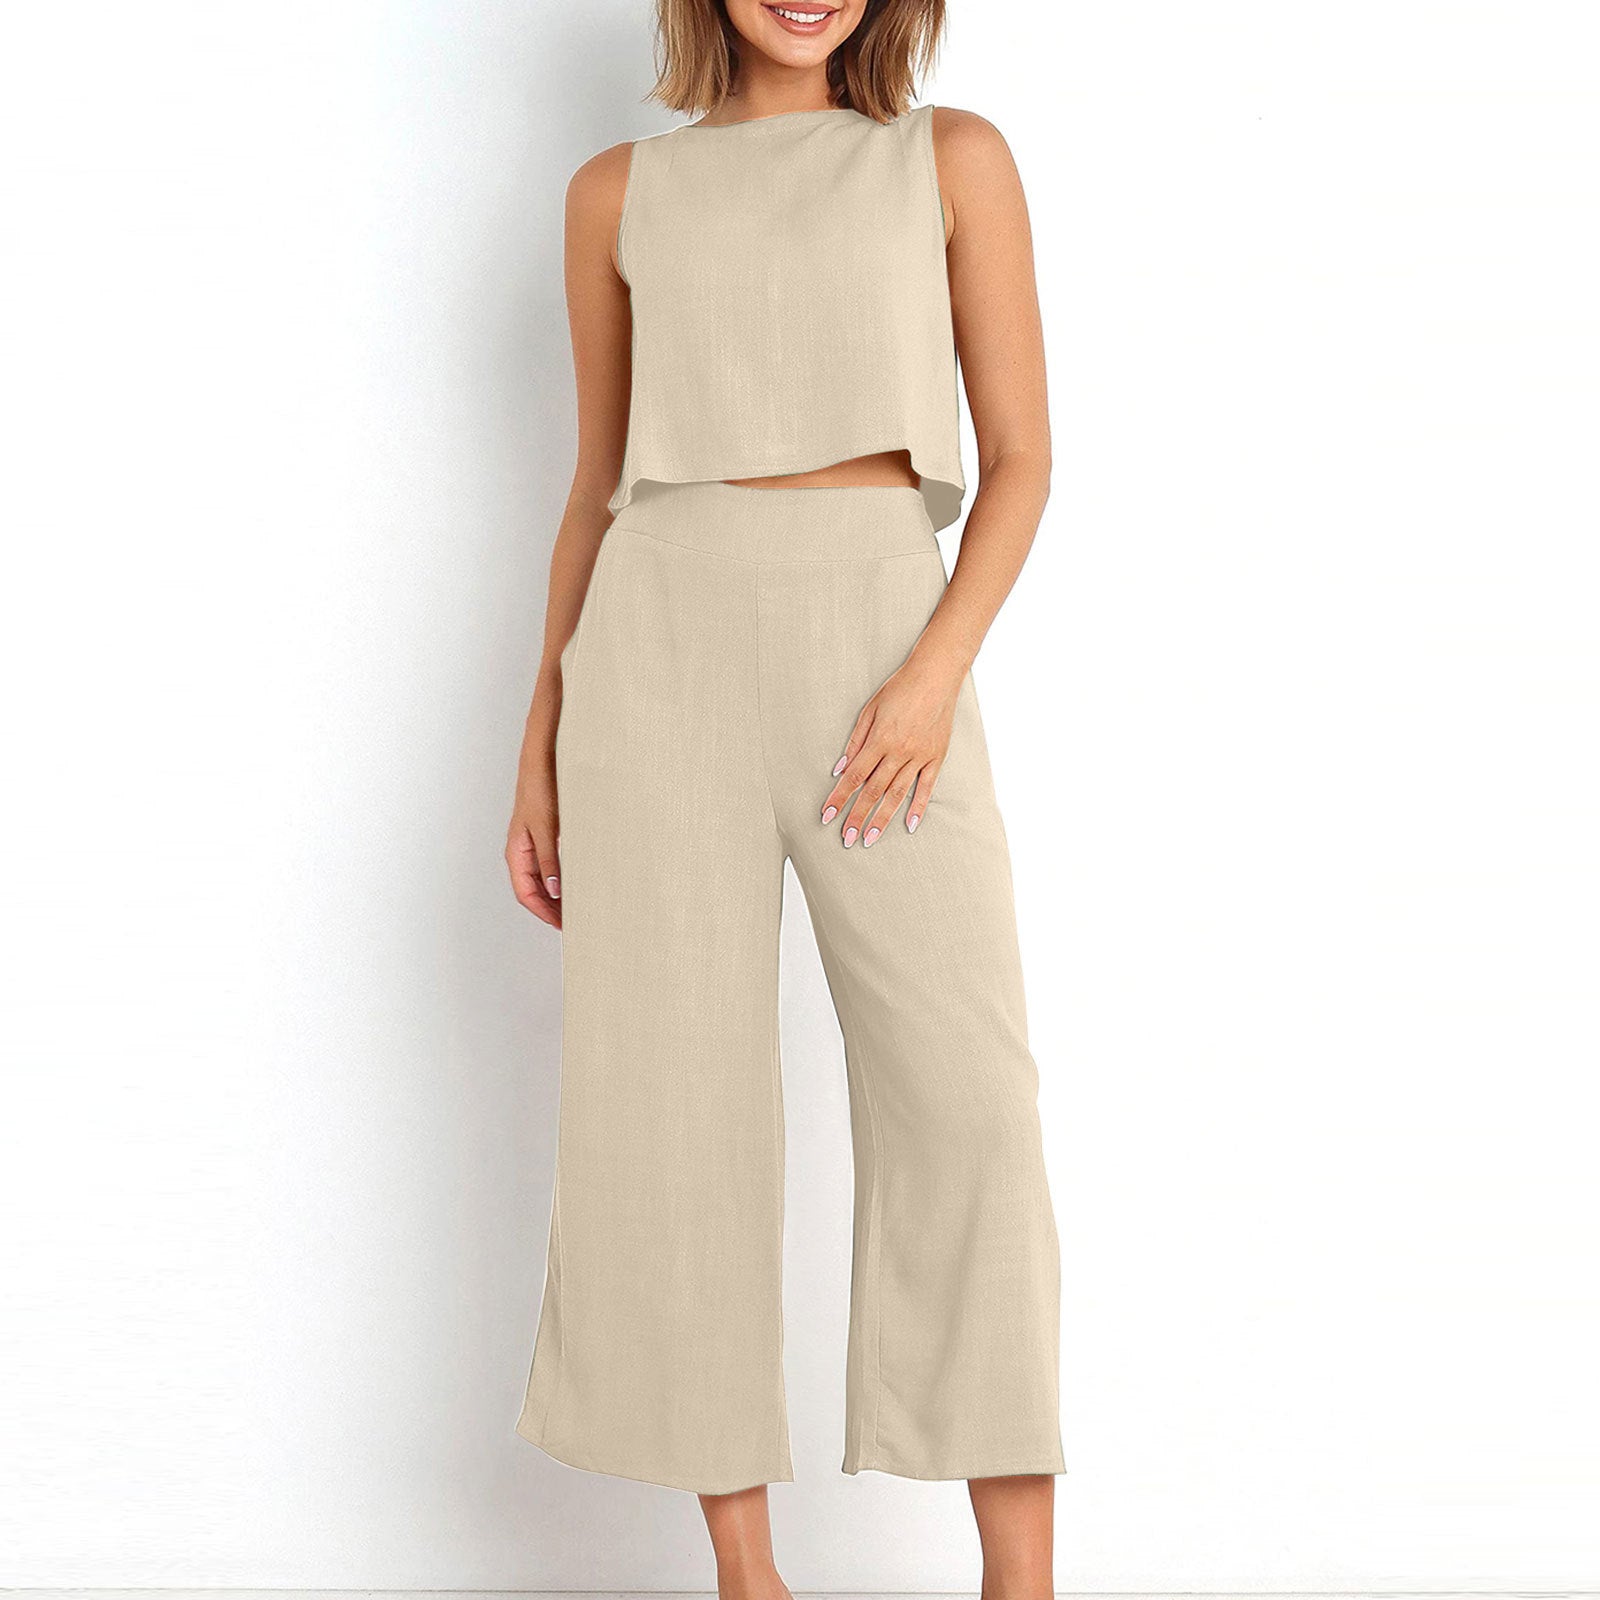 Women's Summer Sleeveless Cropped Pocket Button Suits